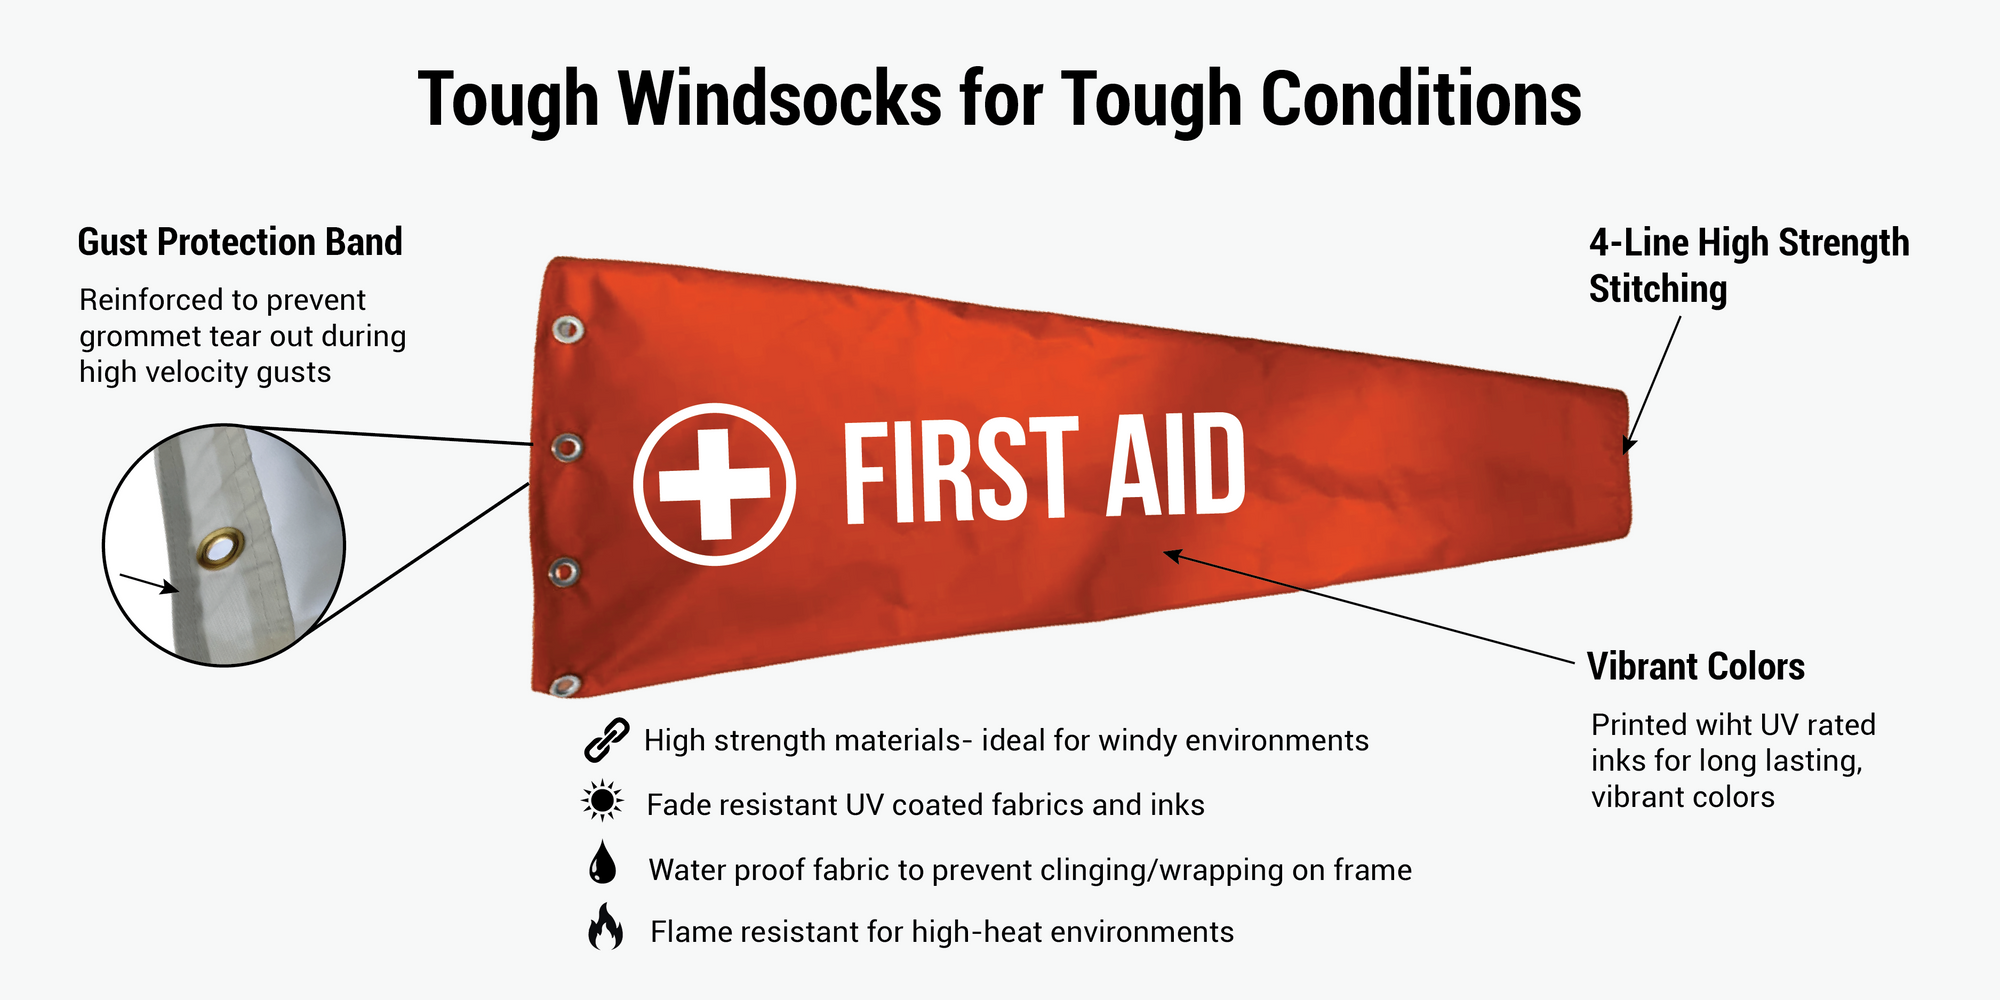 Heavy Duty first aid windsock infographic to show location of first aid tent or facility as well as wind speed and direction 